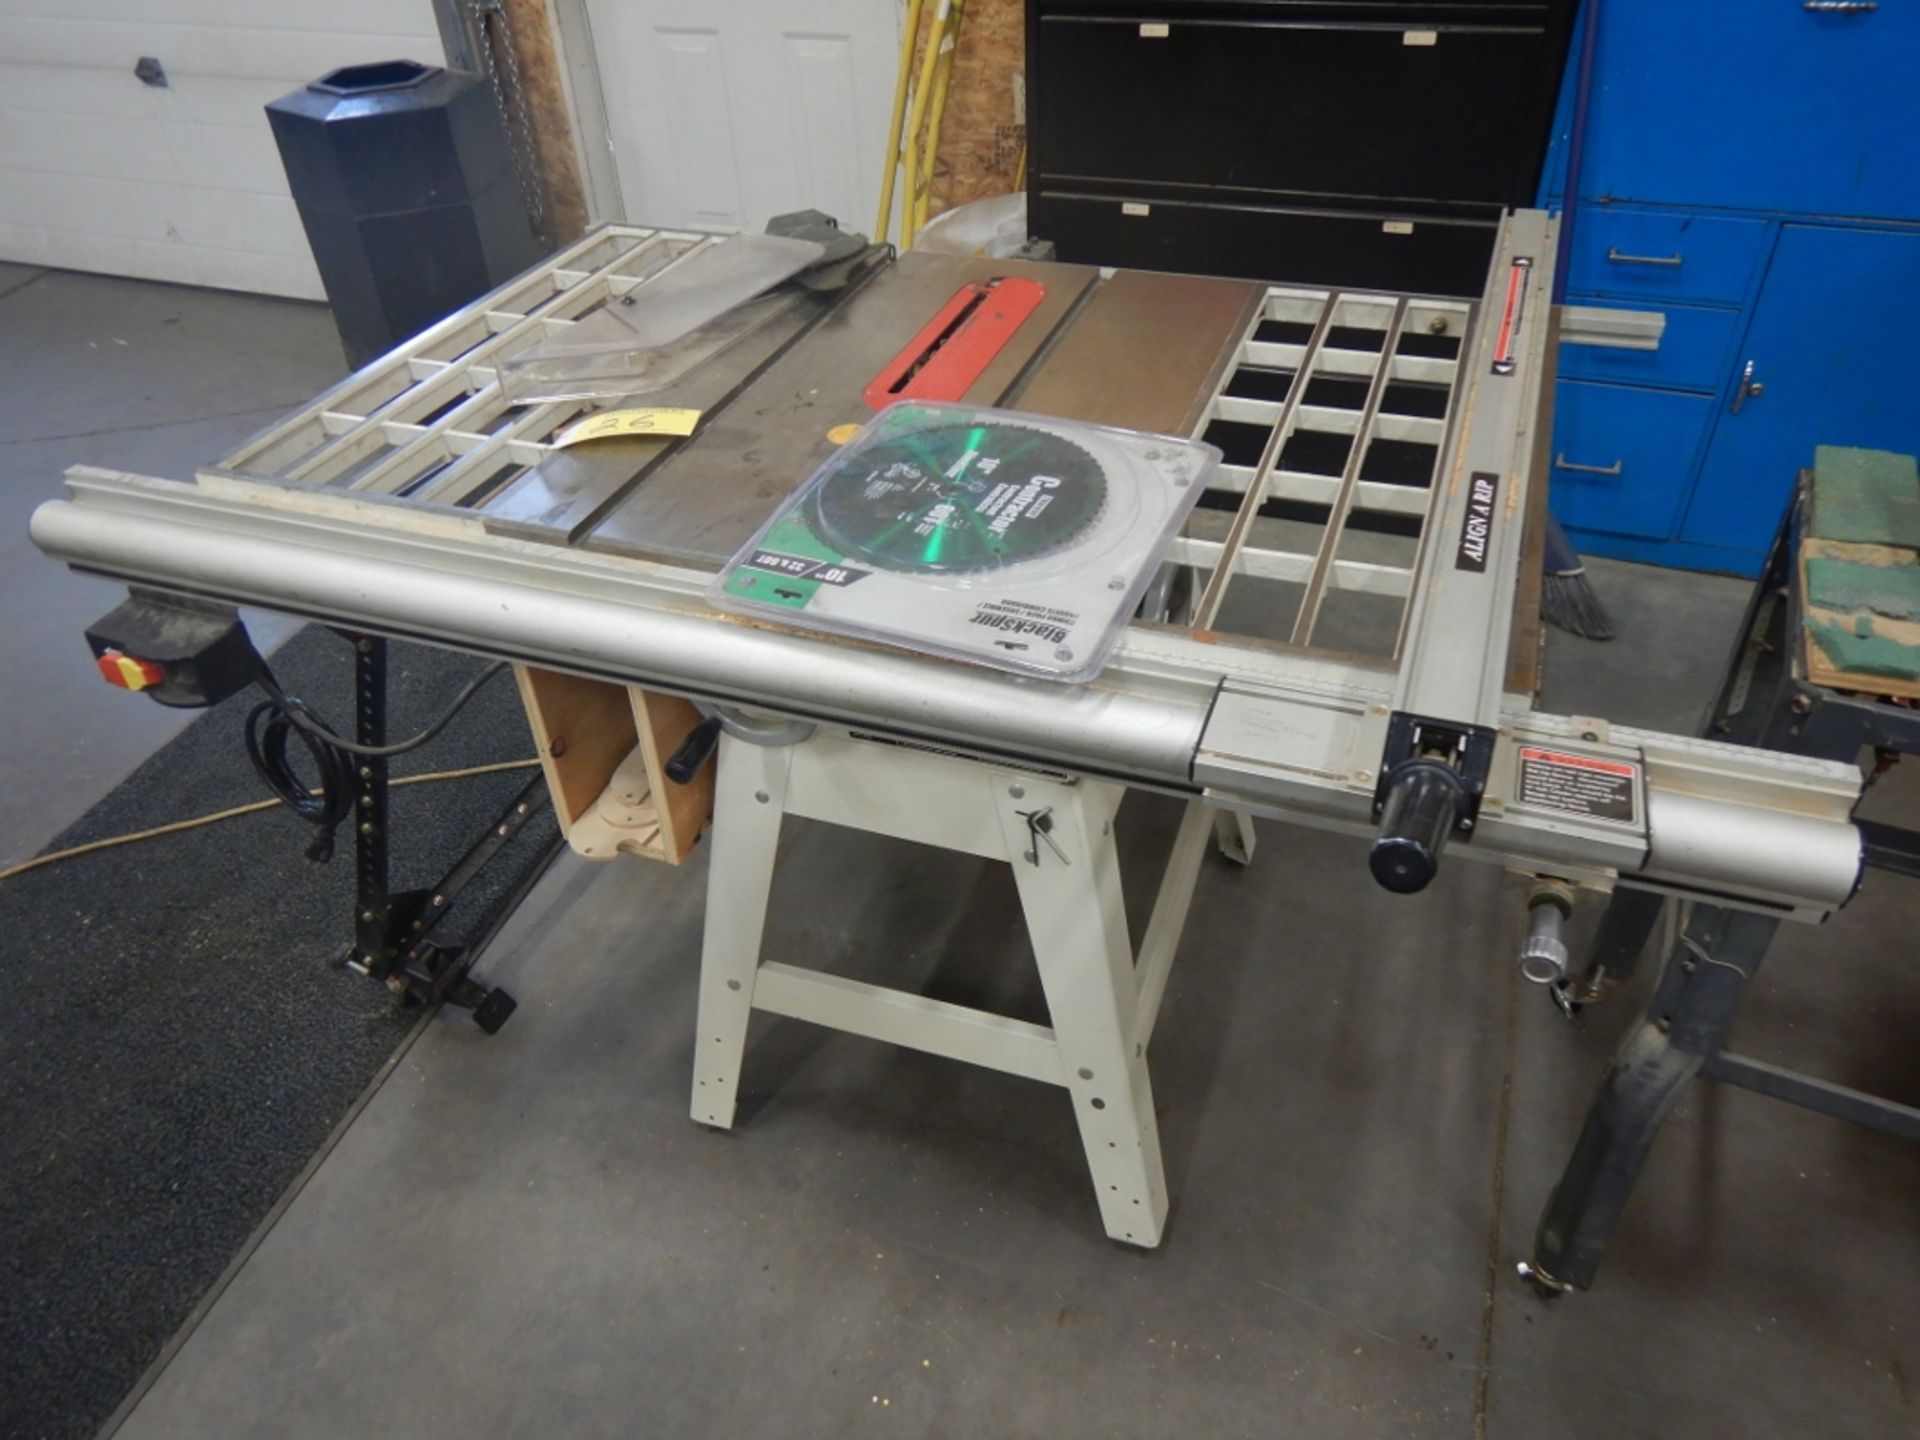 10IN TABLE SAW W/ ALIGN-A-RIP ADJUSTABLE FENCE, 3HP MOTOR